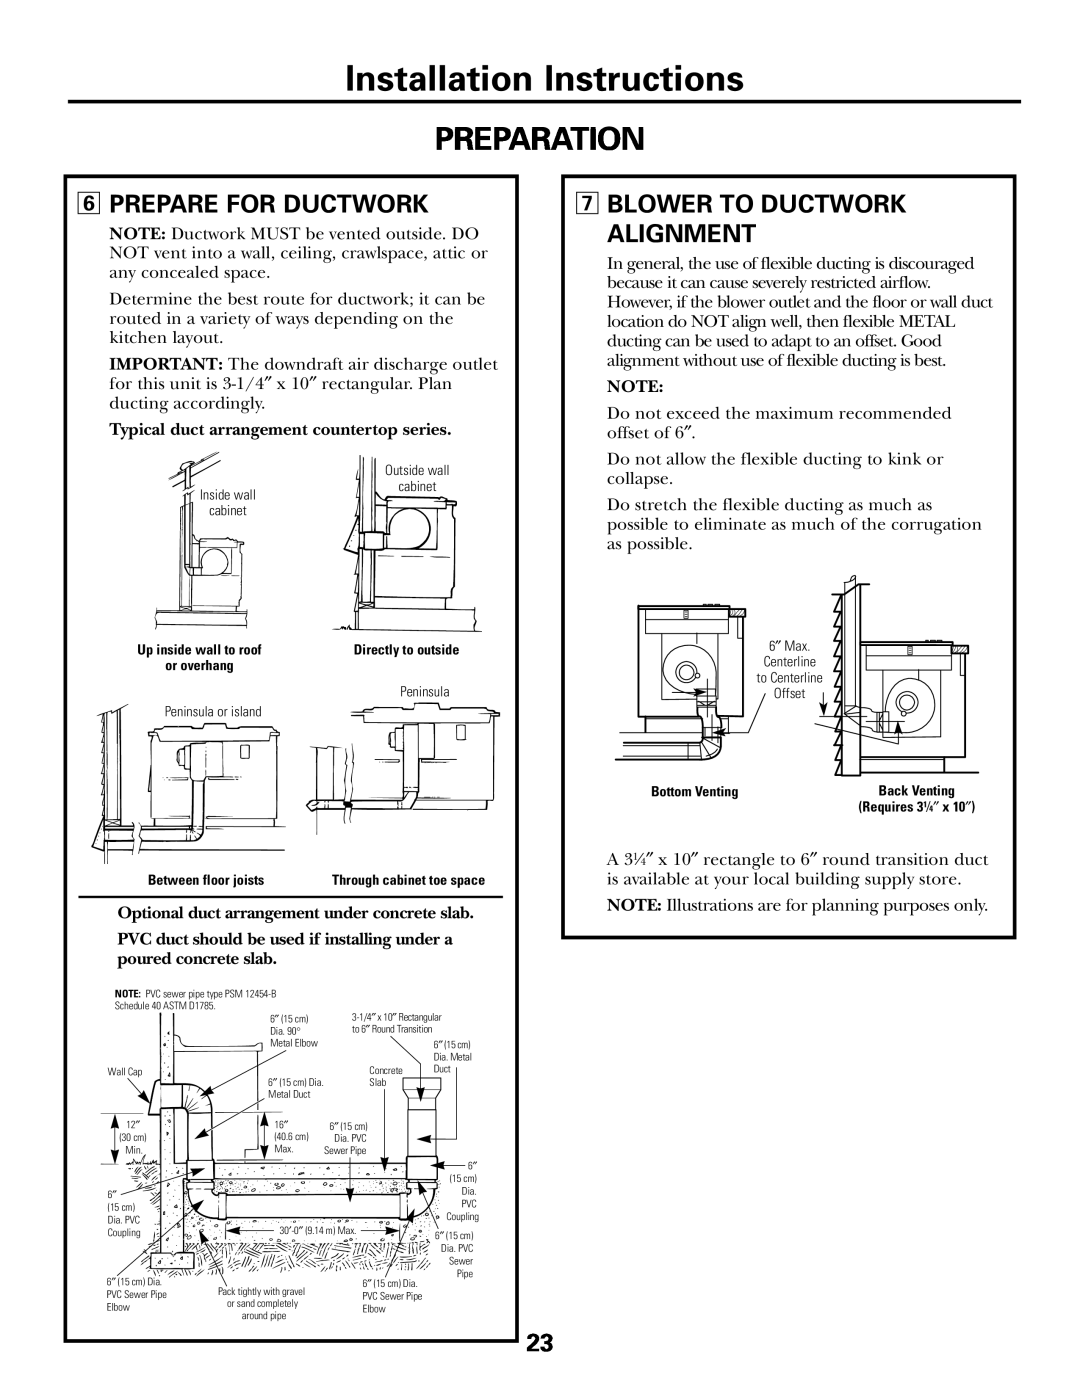 GE JGP985 owner manual Installation Instructions, Preparation, 6PREPARE FOR DUCTWORK, 7BLOWER TO DUCTWORK ALIGNMENT 